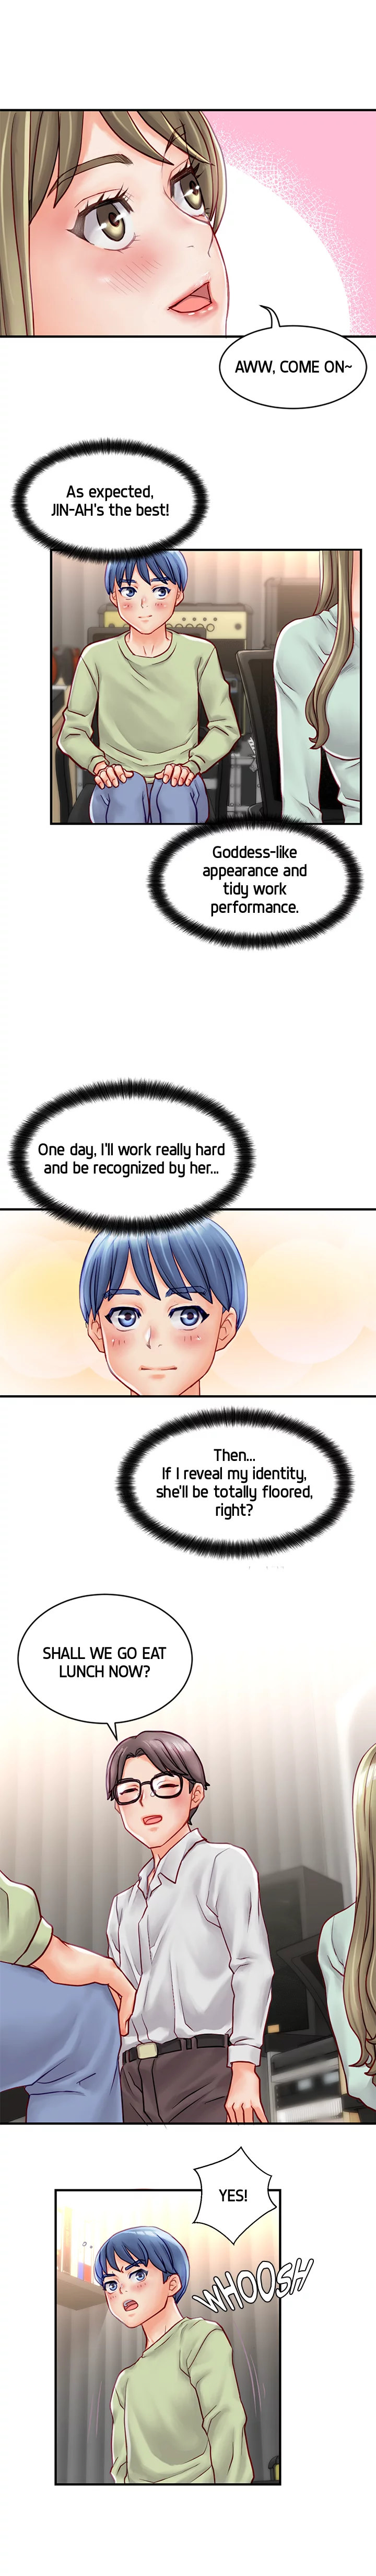 Love Is On The Air - Chapter 1 Page 14